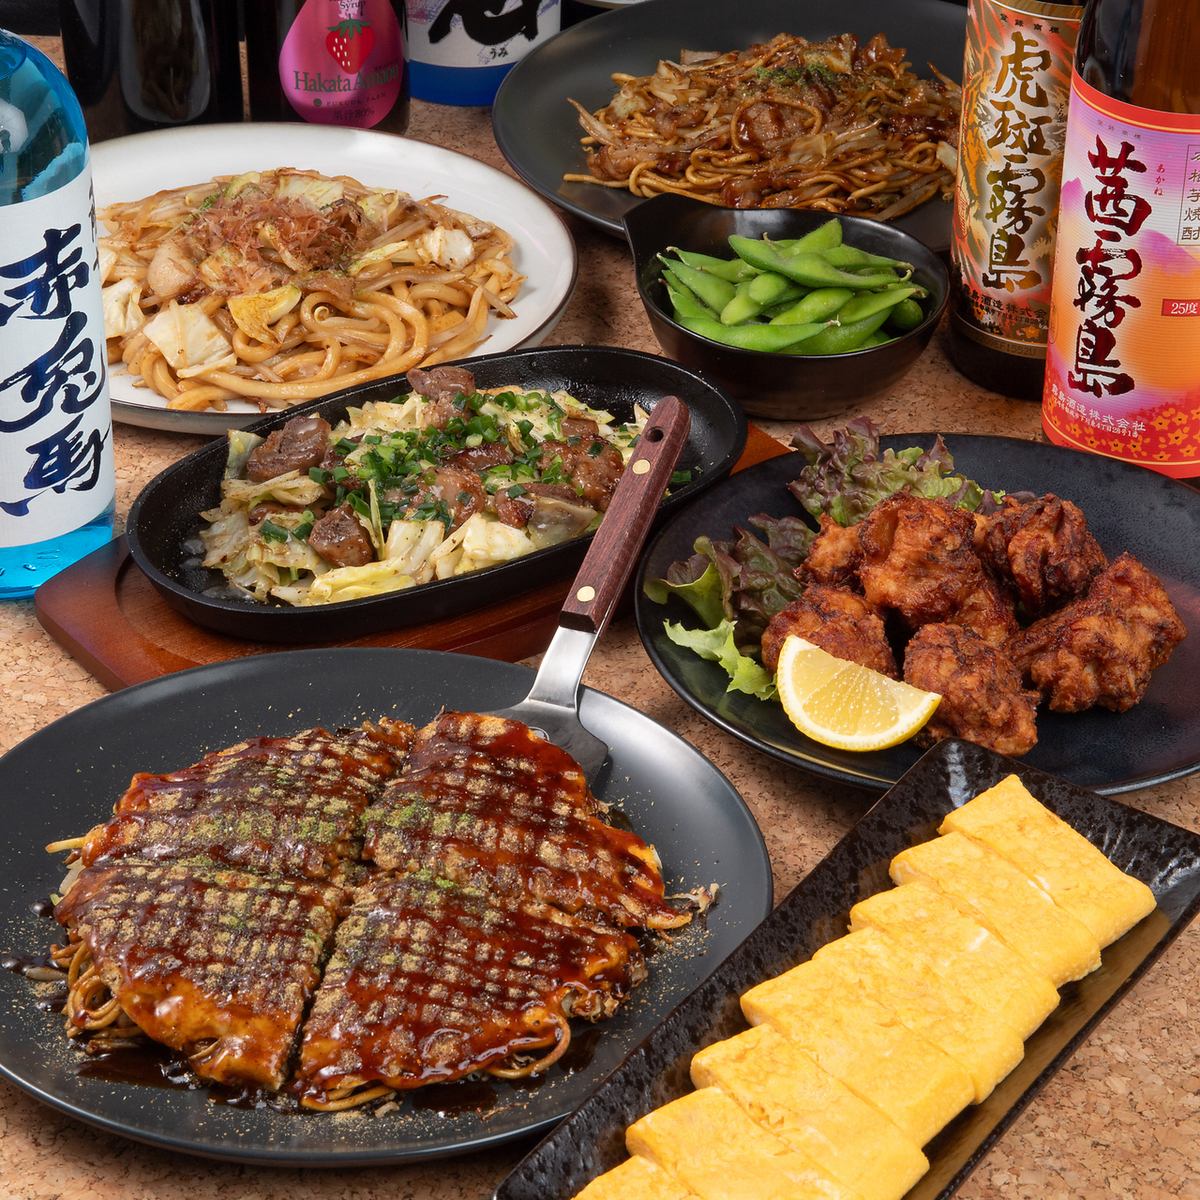 Please come to our restaurant for all kinds of banquets! 7 dishes and all-you-can-drink included for only 4,500 yen!